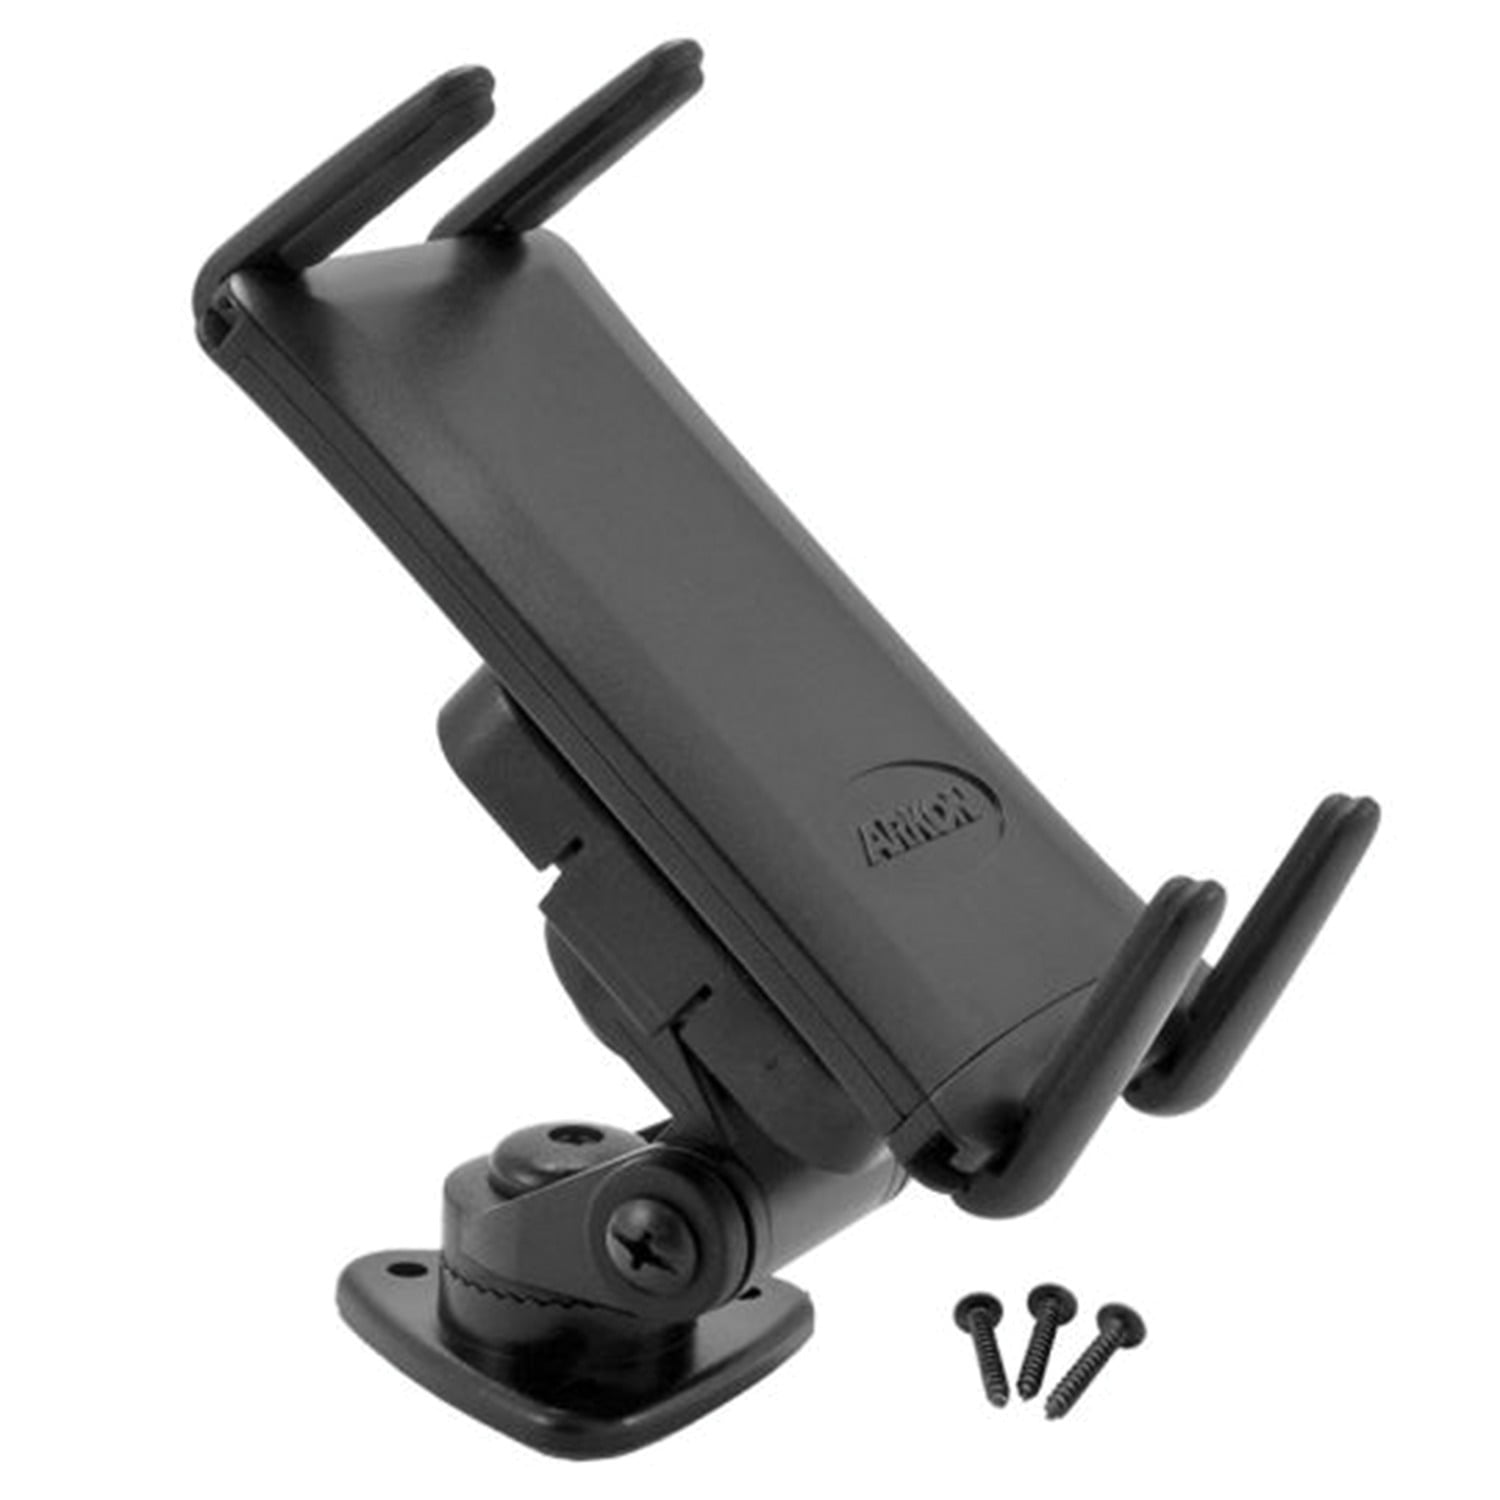 Sticky Suction Windshield or Dash Slim-Grip® Tablet Mount for iPad, No —  Arkon Mounts